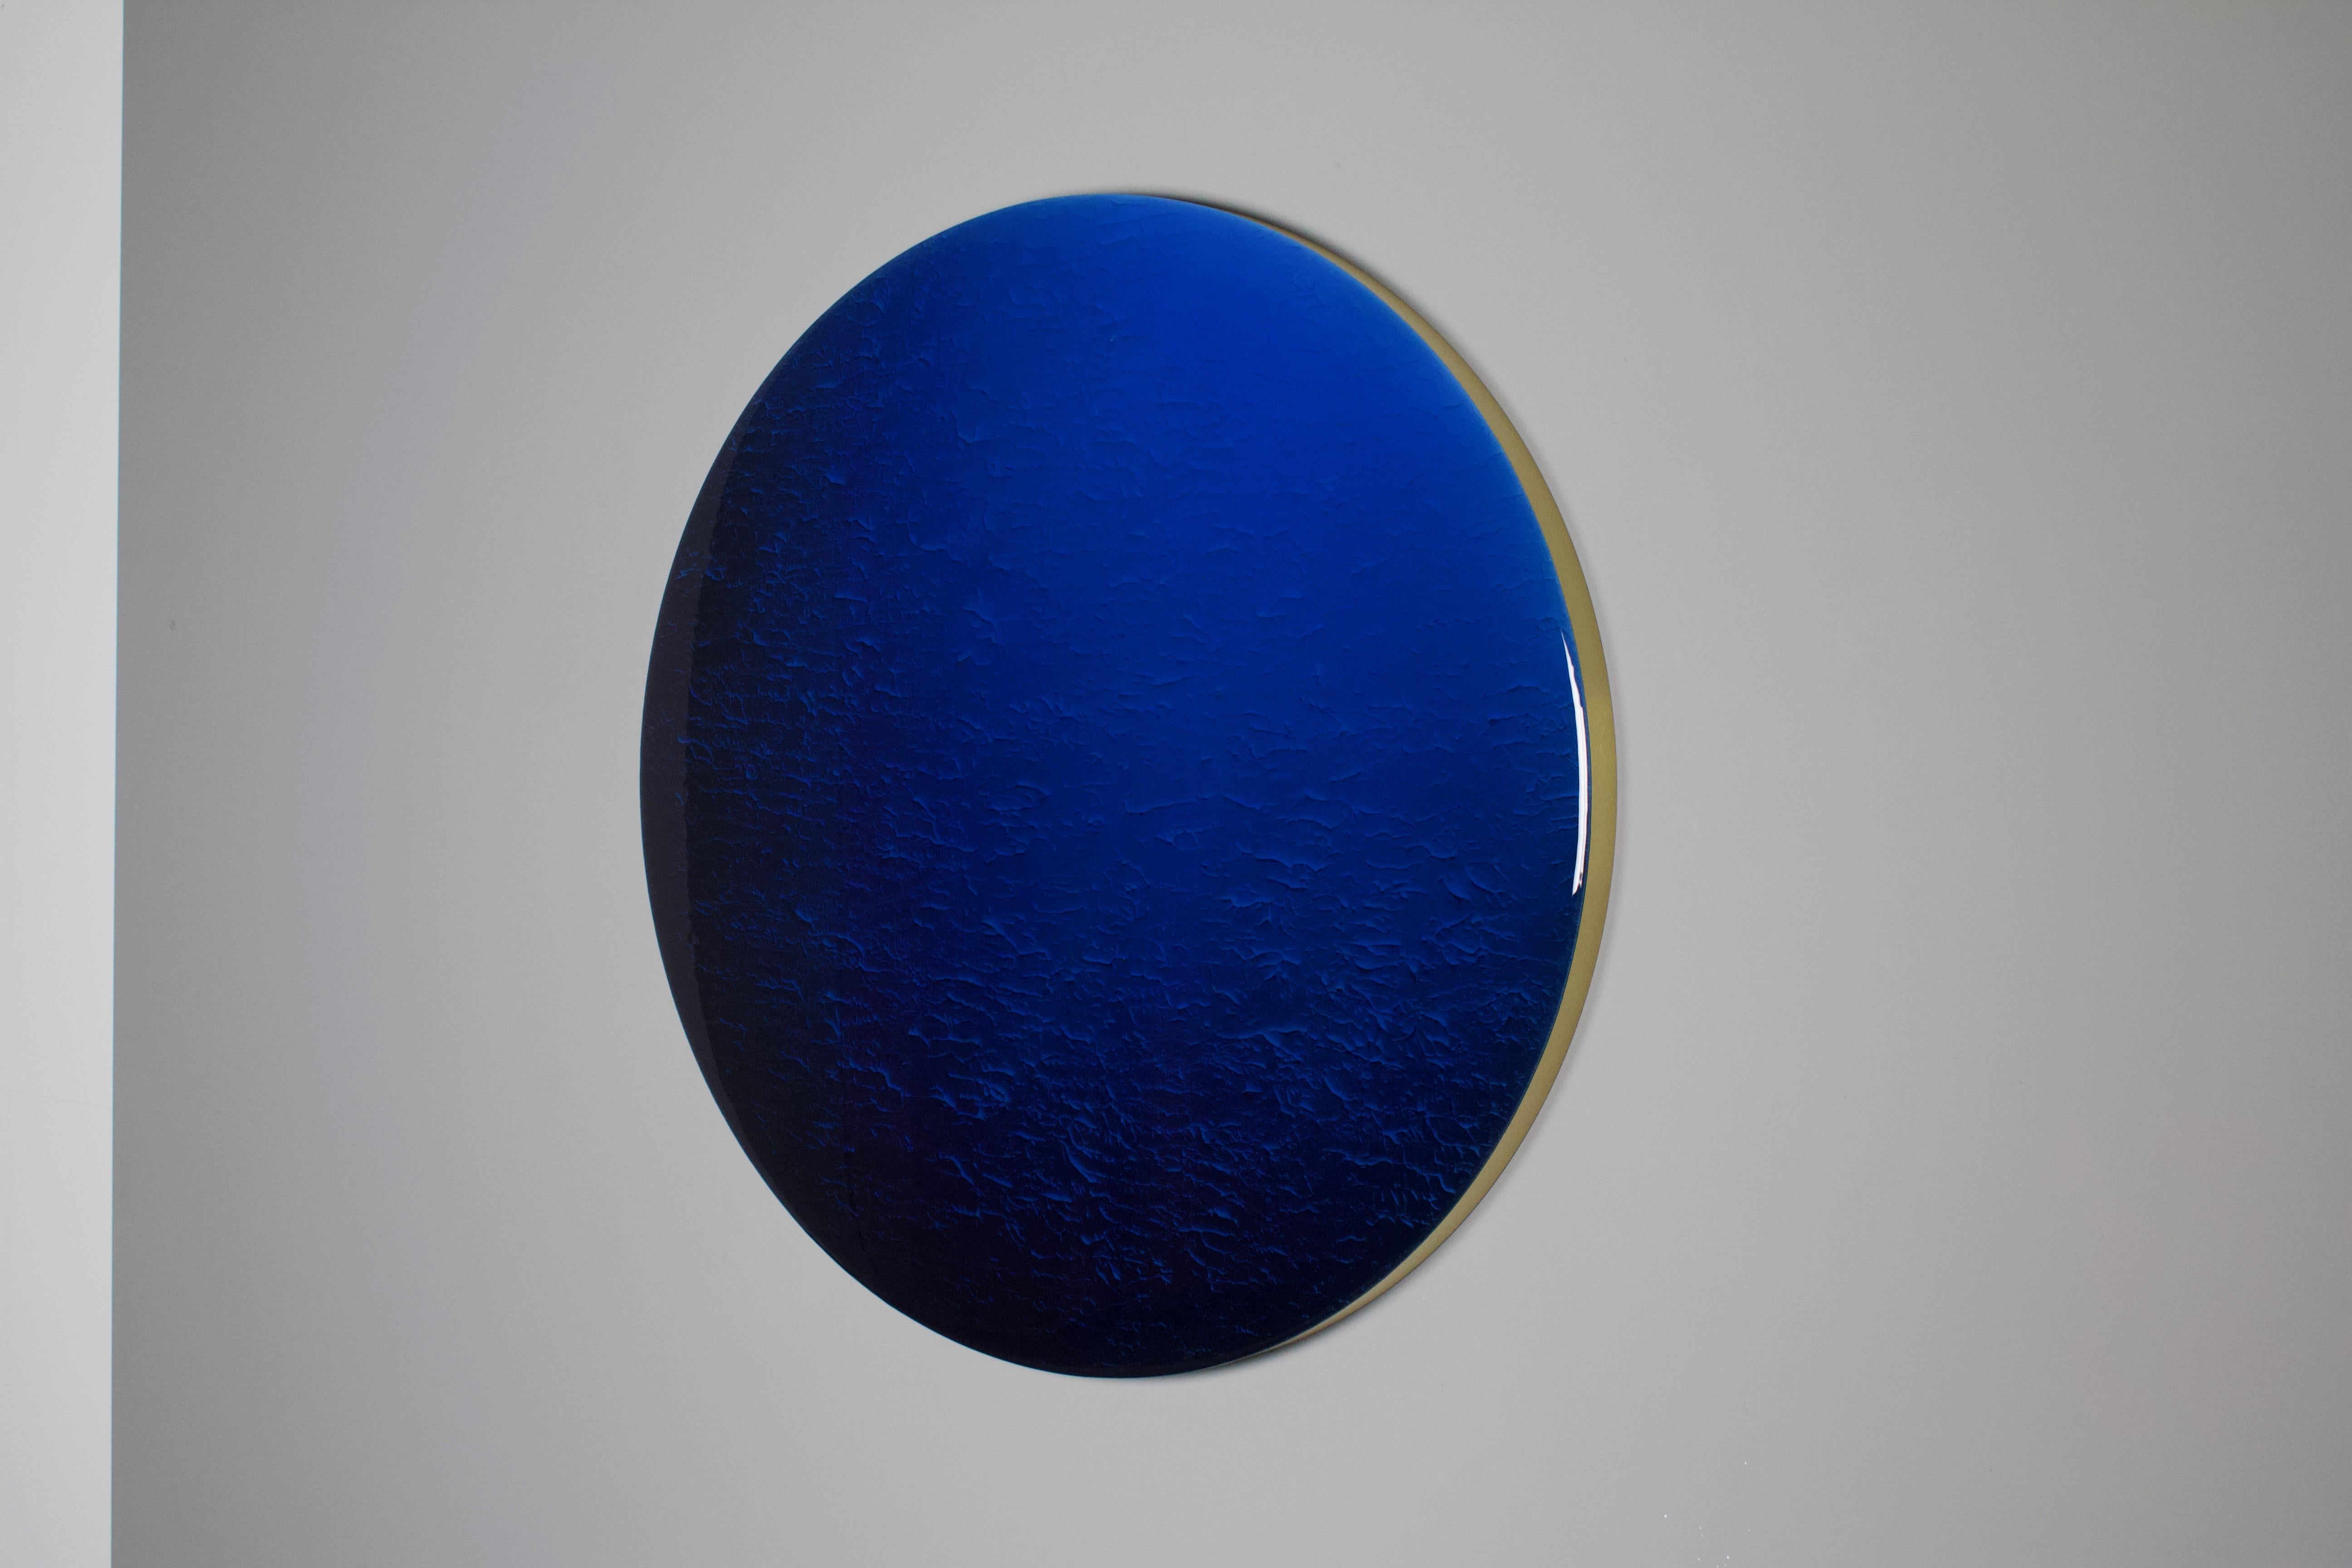 Two Kinds Of People Minimalistic Round by Corine Vanvoorbergen
Dimensions: diameter 130 cm
Materials: Brass, Wood, Natural pigments, Epoxy and Acrylics

There are two kinds of people. Those that see the night coming and those that see the day